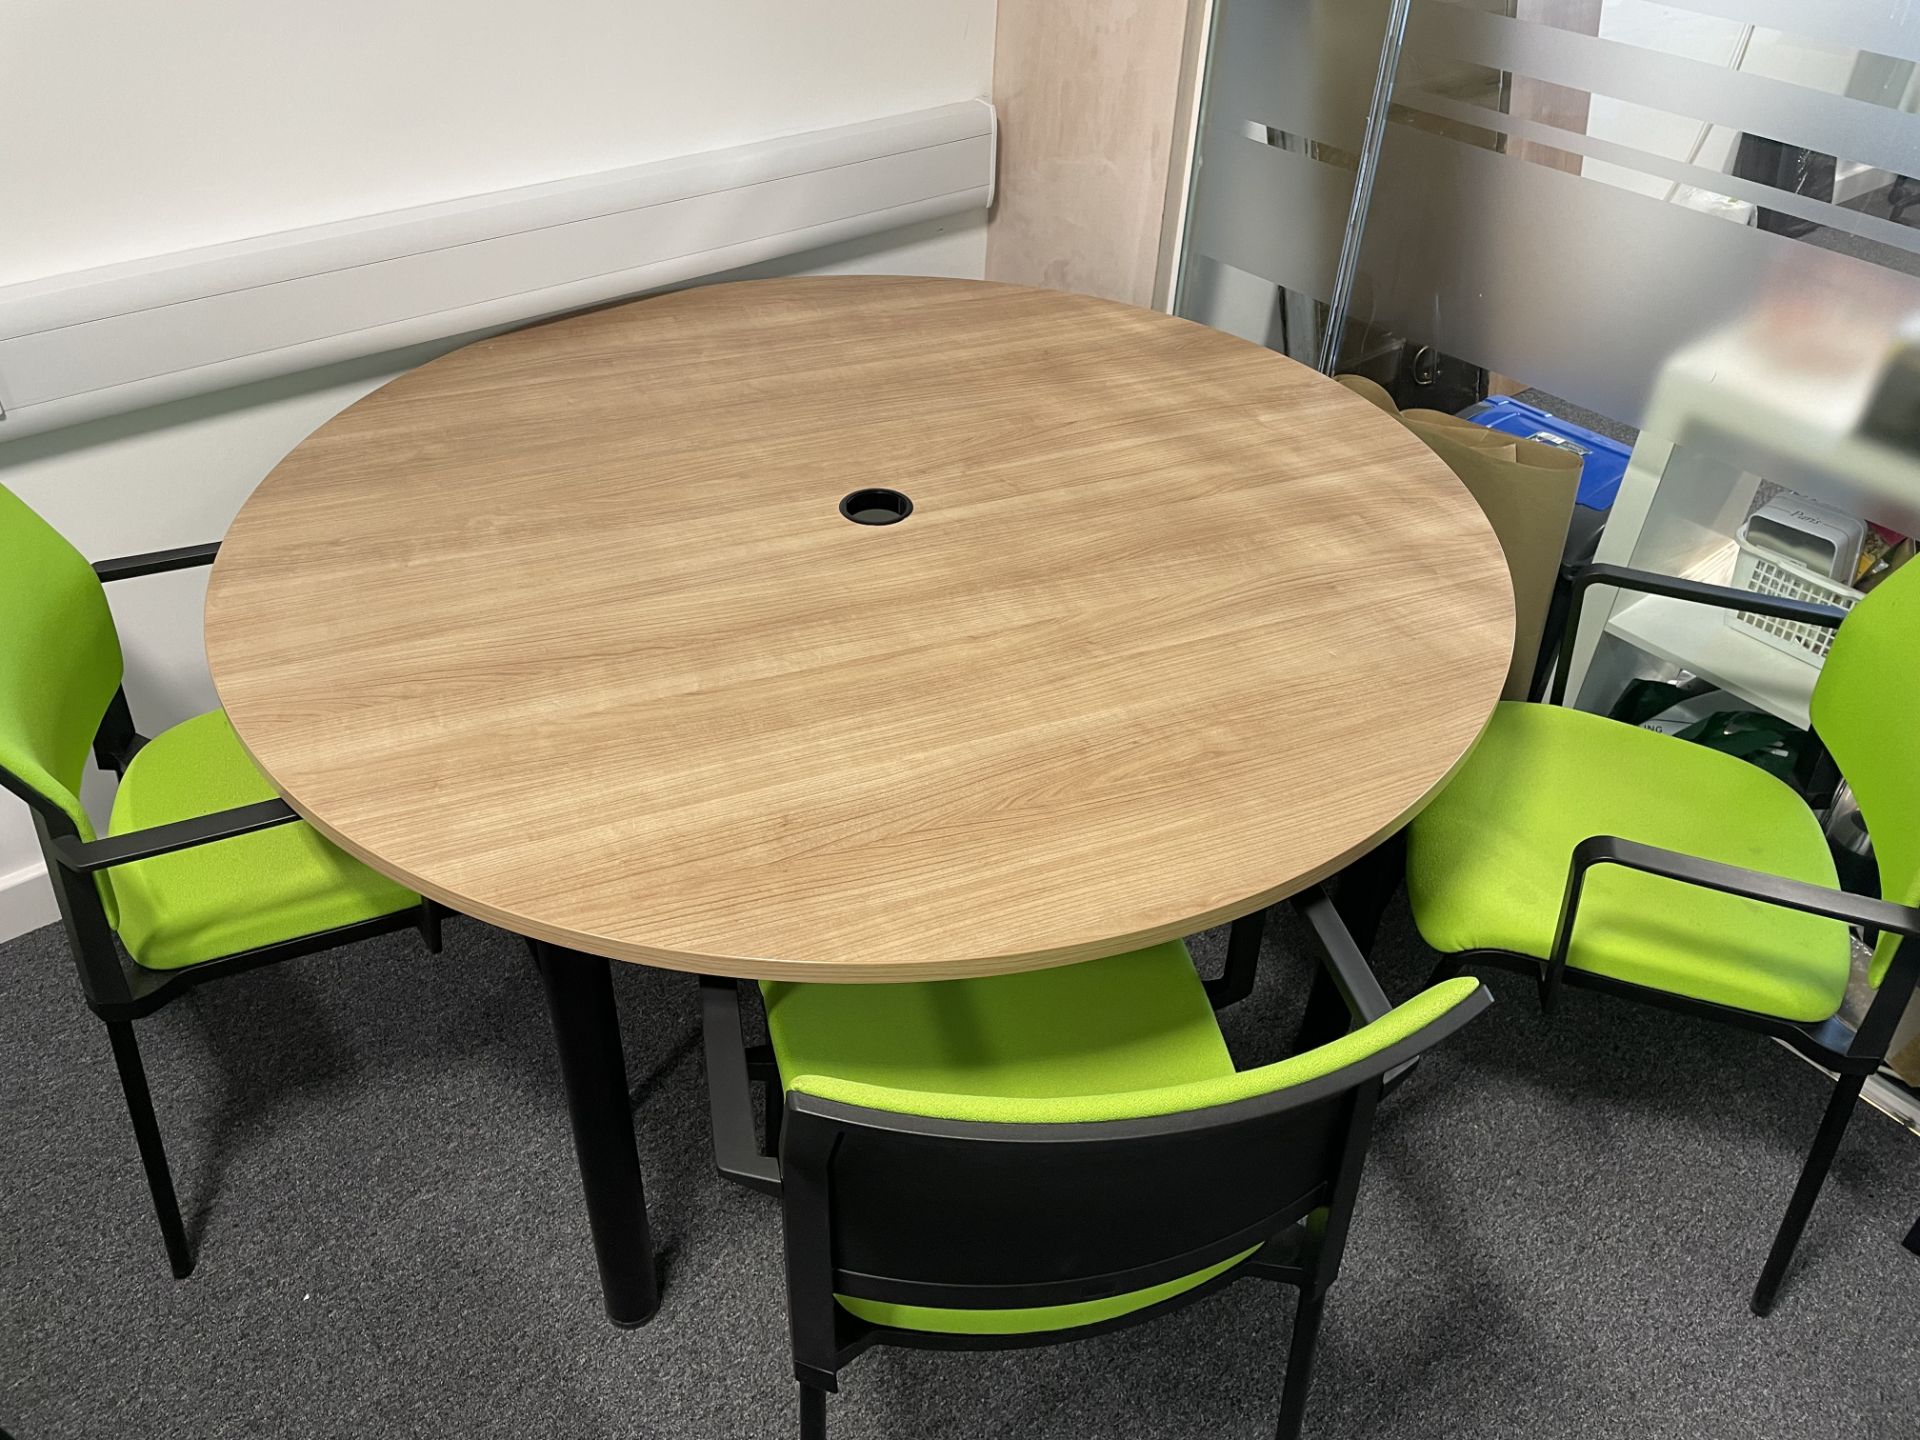 1 x round office table with 5 x green fabric chairs - Image 2 of 2